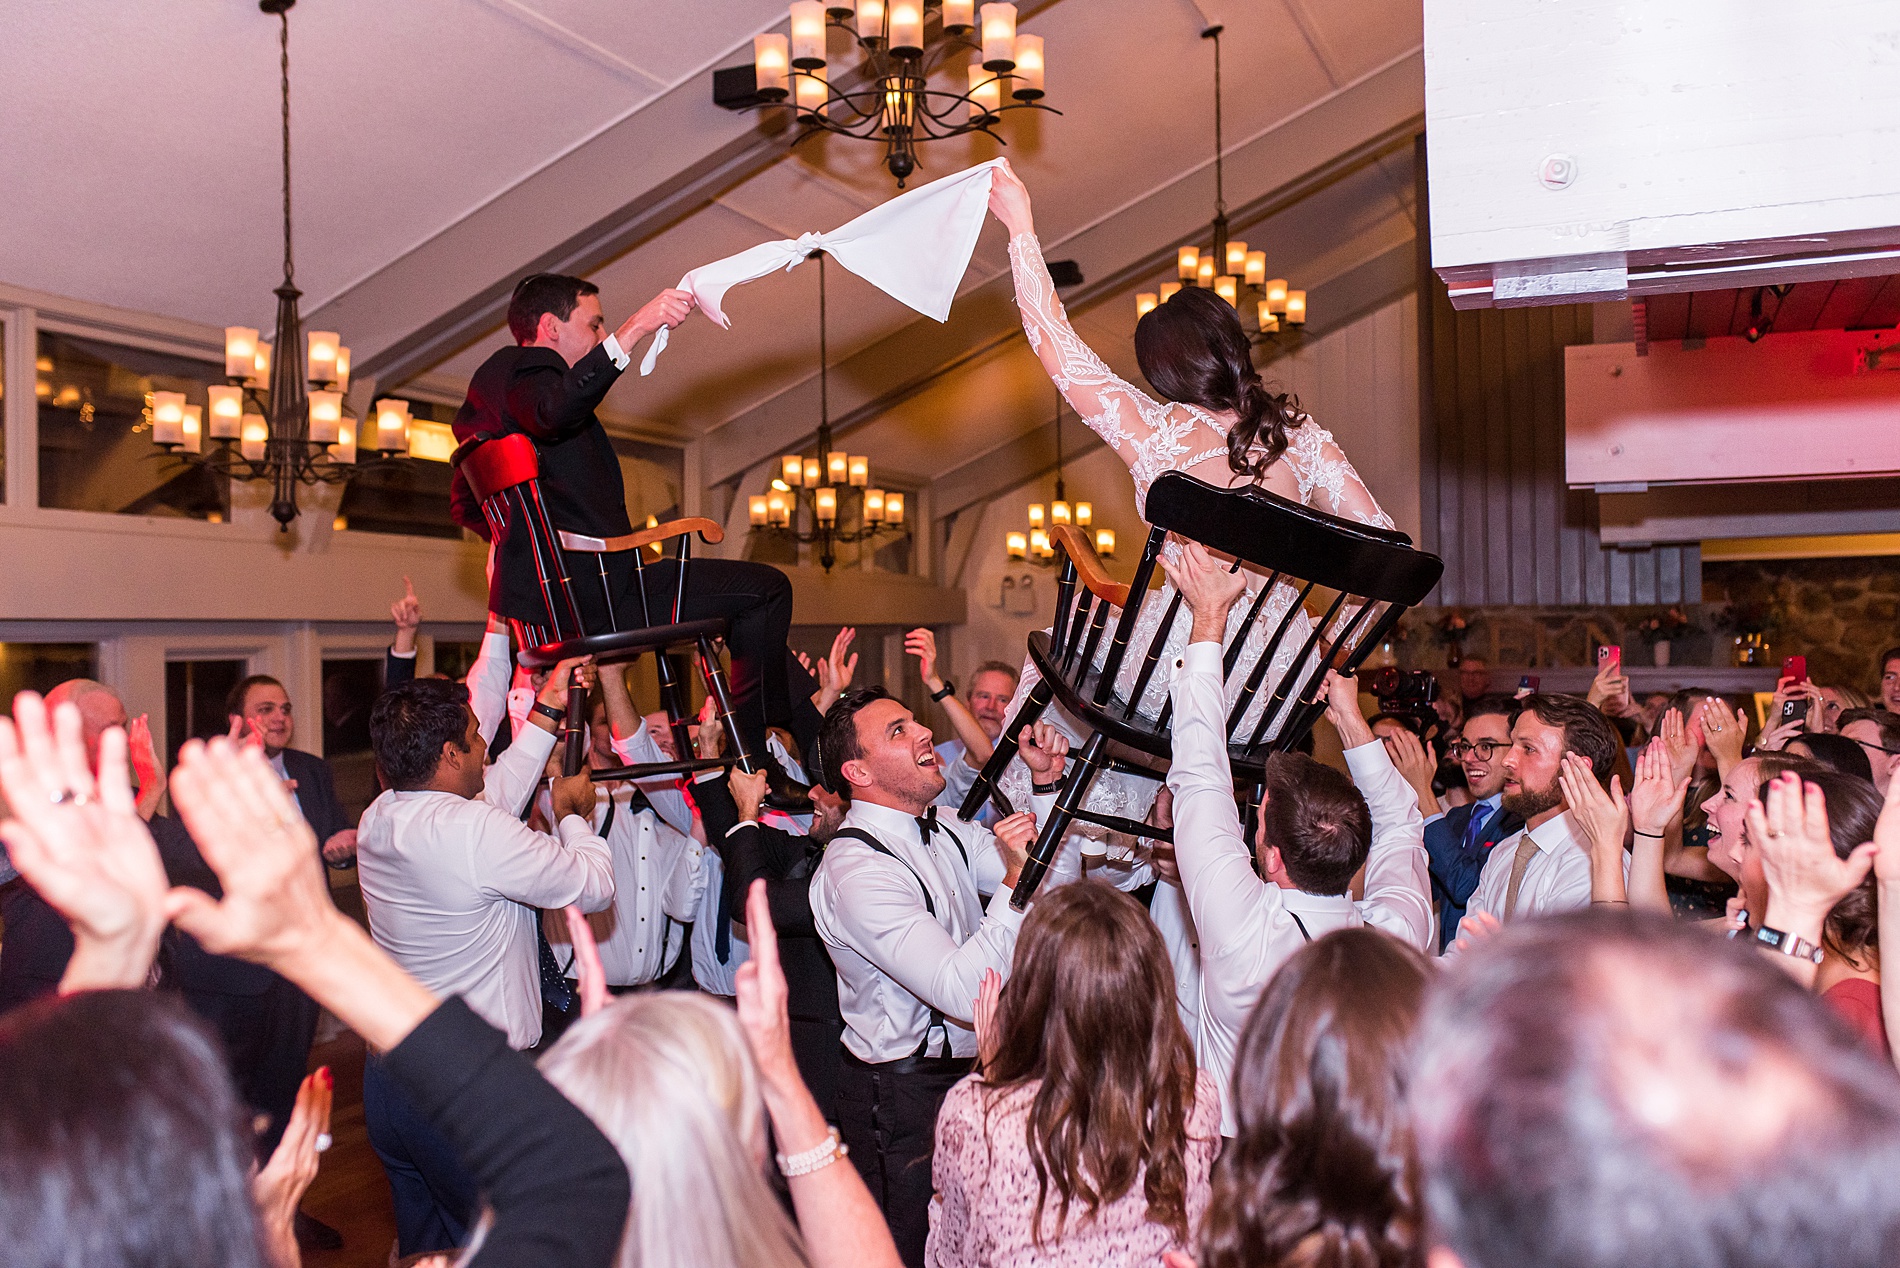 newlyweds raised on chairs during Jewish tradition celebrating their union